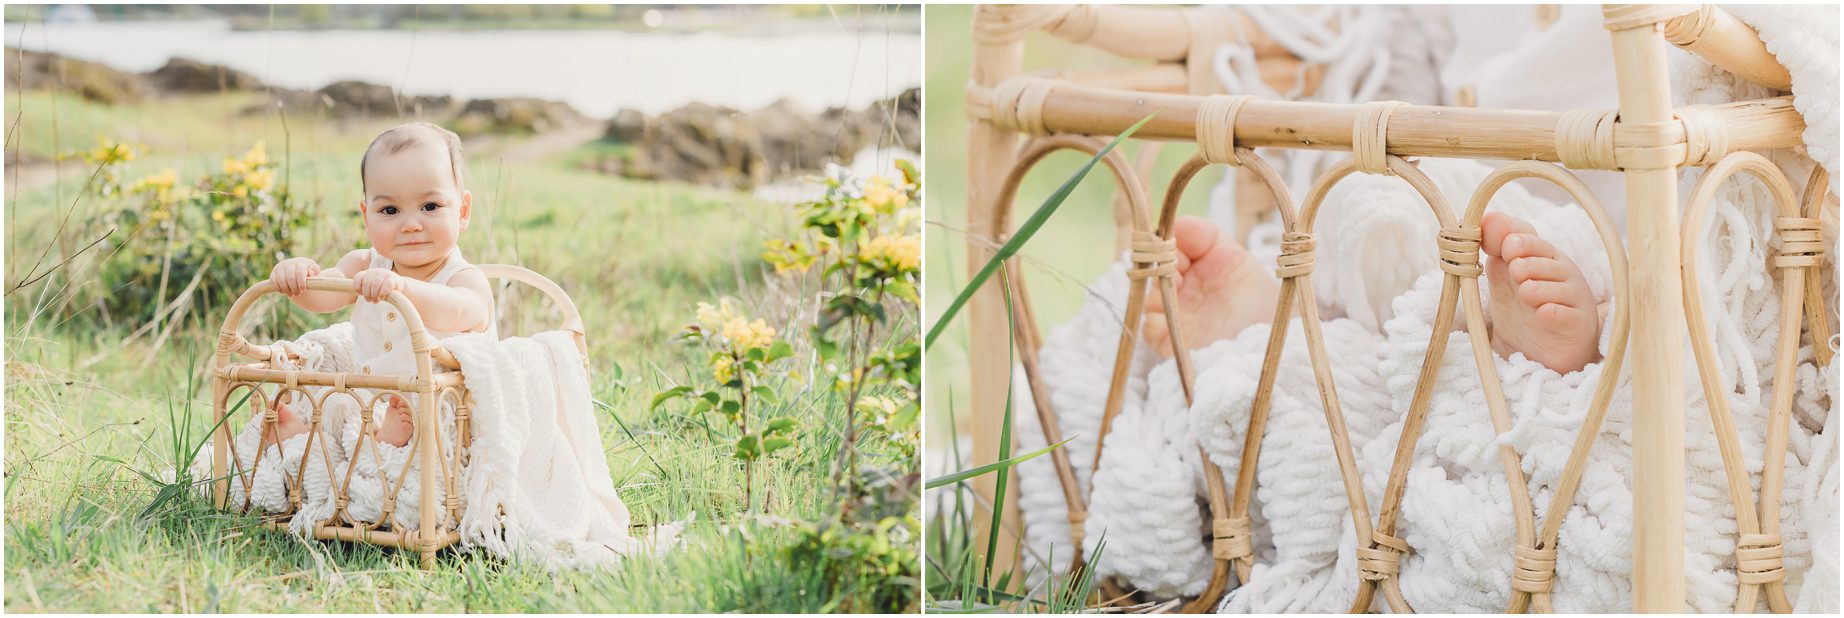 A one year old in a basket with white linen on Elk Rock Island, by a Lake Oswego Family Photographer